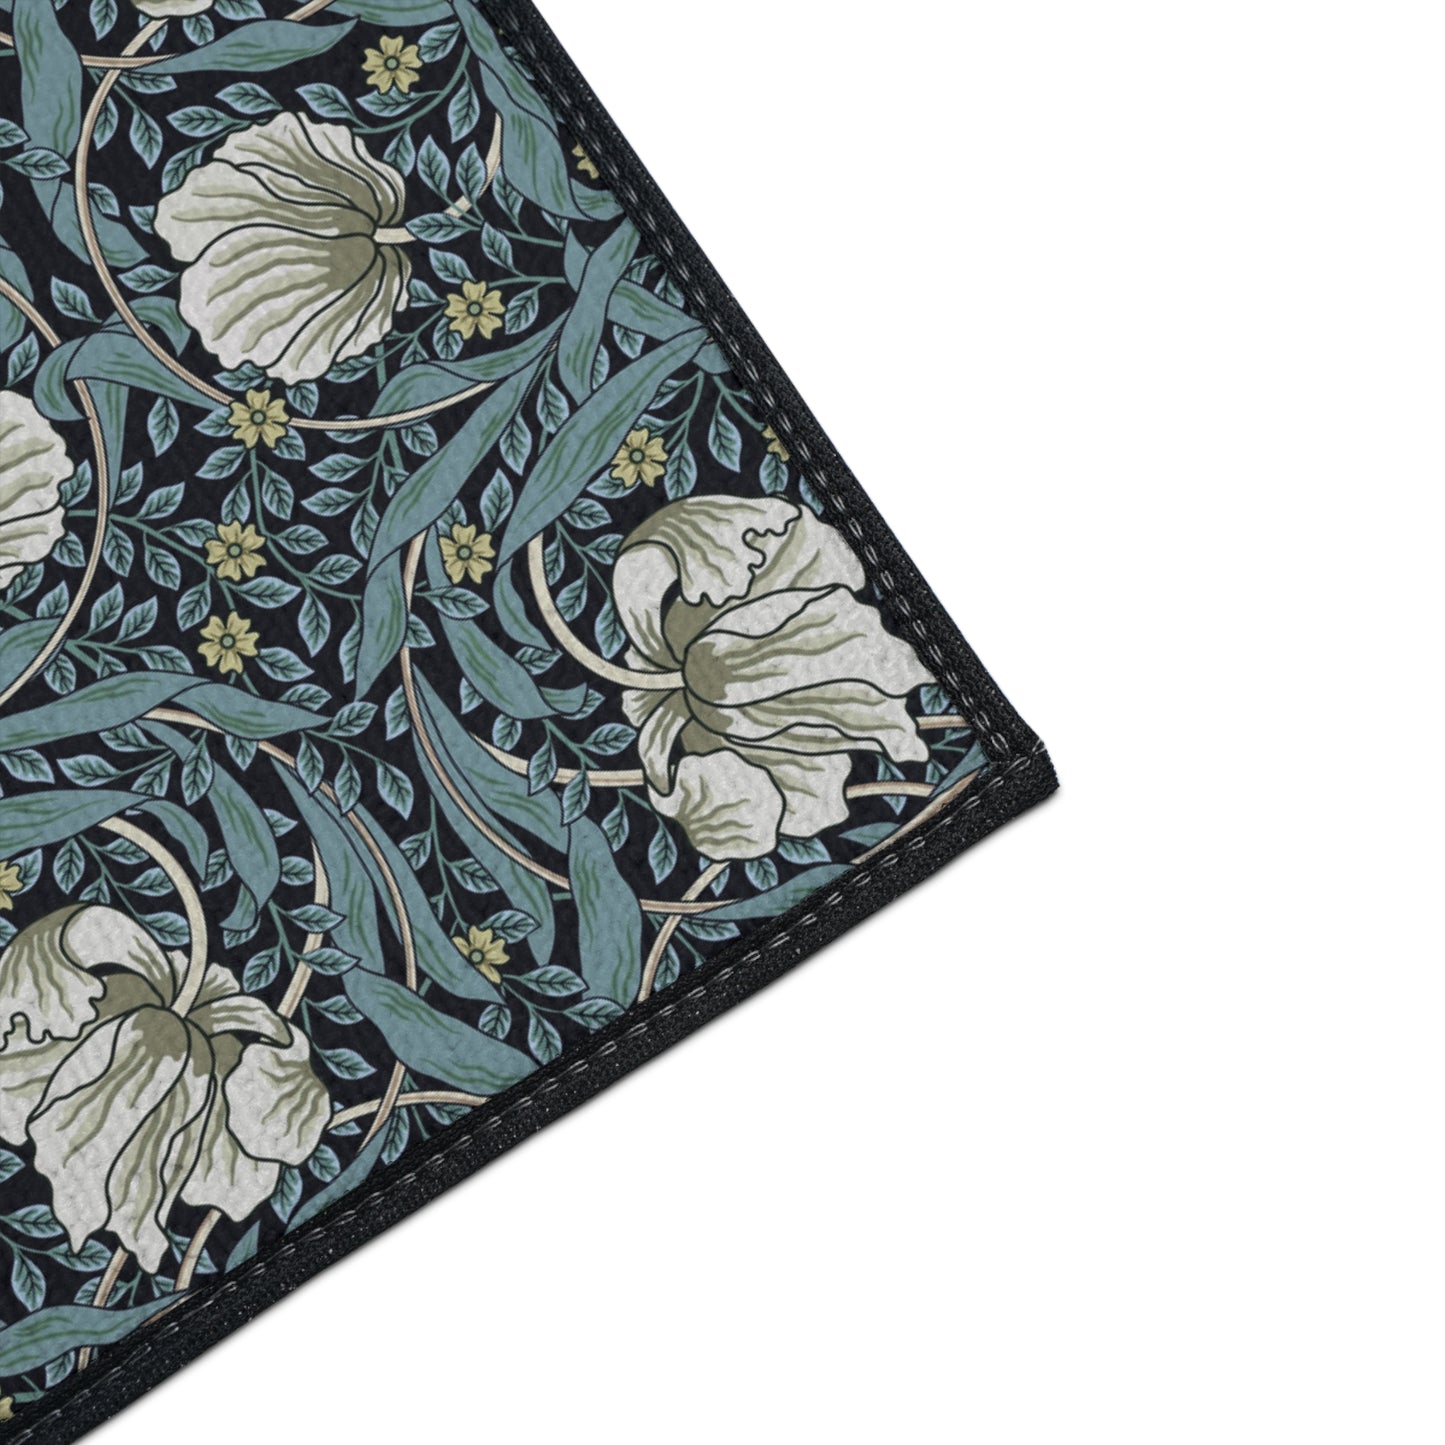 william-morris-co-heavy-duty-floor-mat-pimpernel-collection-slate-18